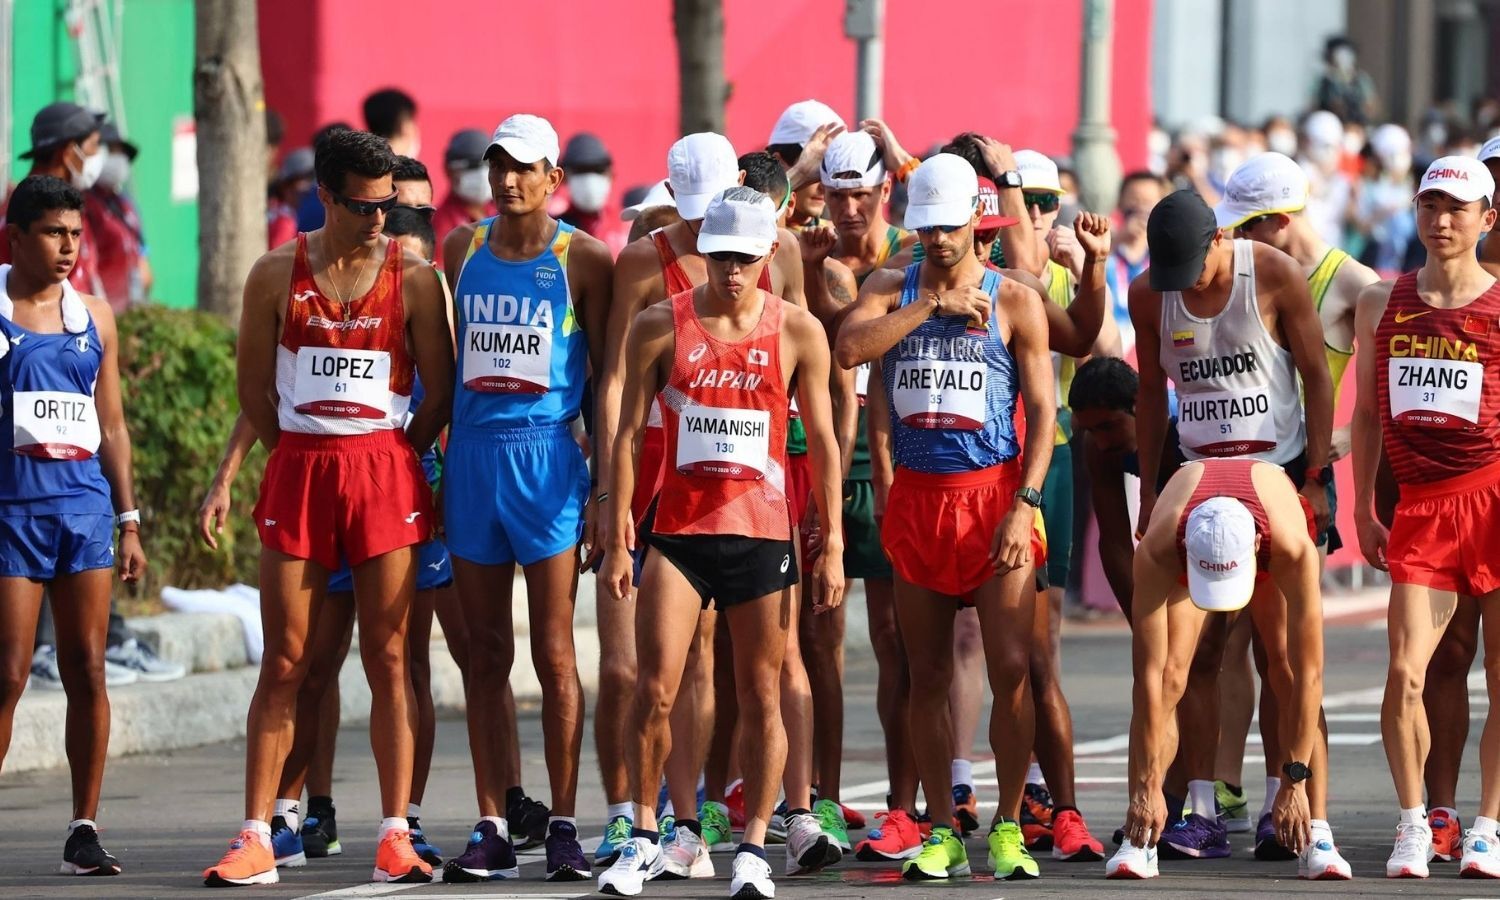 22 Paris quotas up for grabs in the Race Walking Mixed Relay